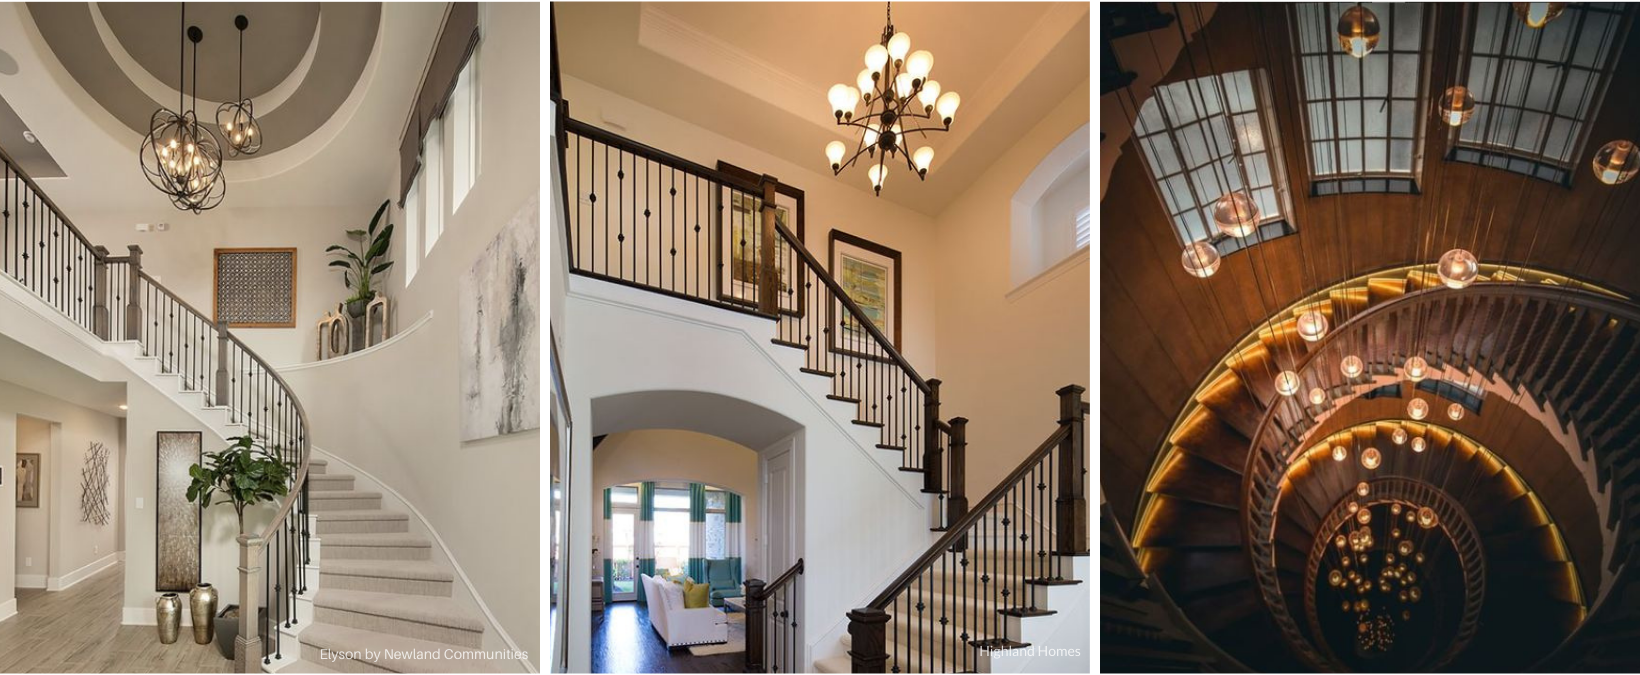 StaircaseChandeliers in Foyers: Exploring Unconventional and Artistic Designs